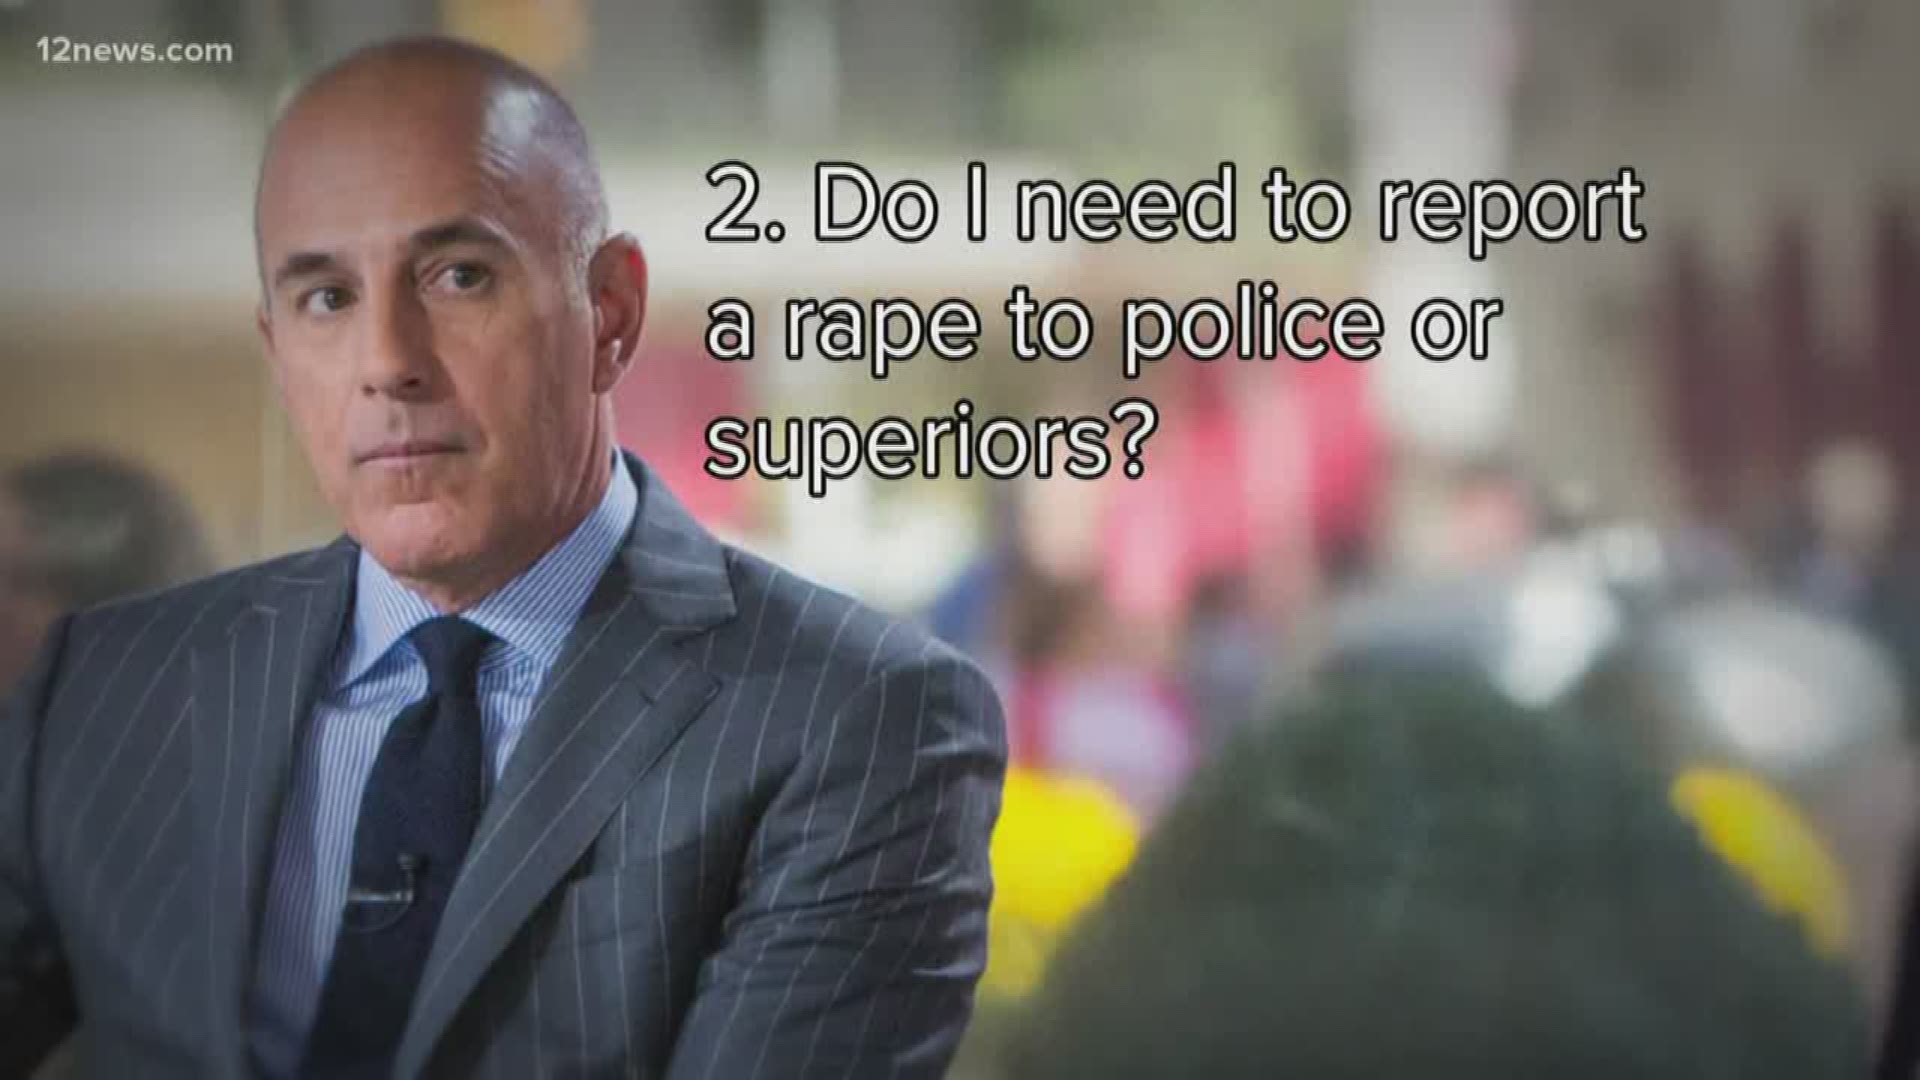 Allegations of rape against Matt Lauer are surfacing. It's all raising questions about what people should report to their employer.